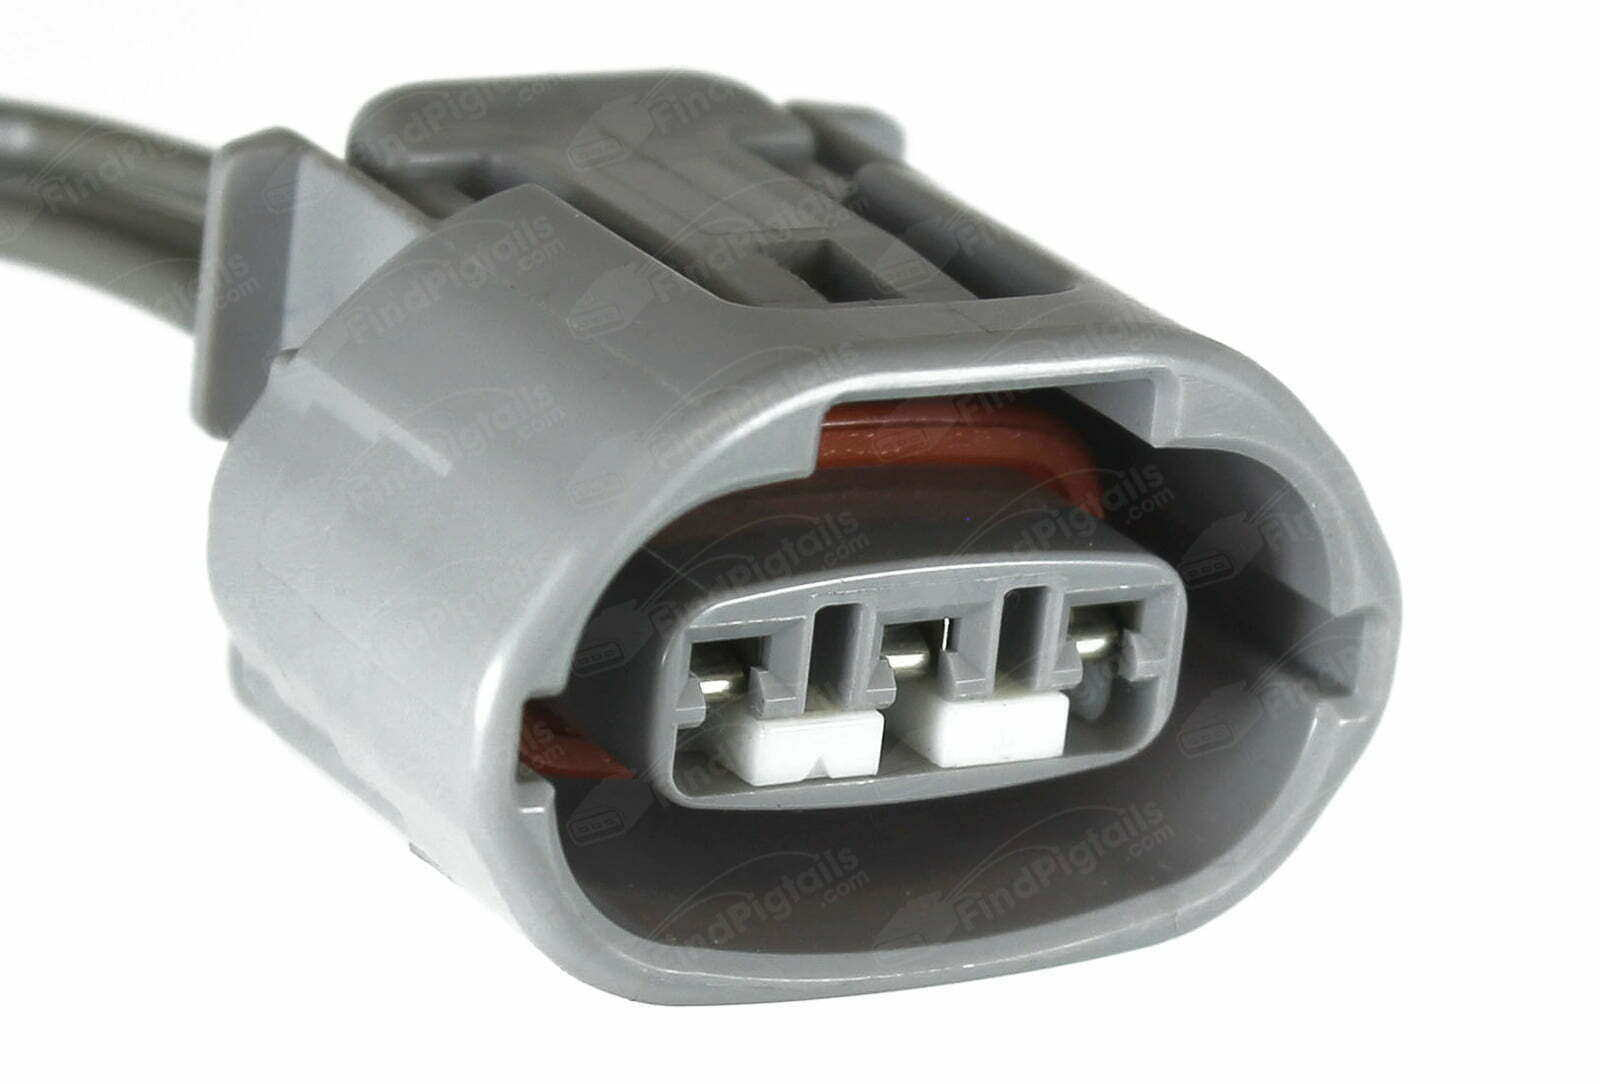 Y31C3 is a 3-pin automotive connector which serves at least 317 functions for 1+ vehicles.